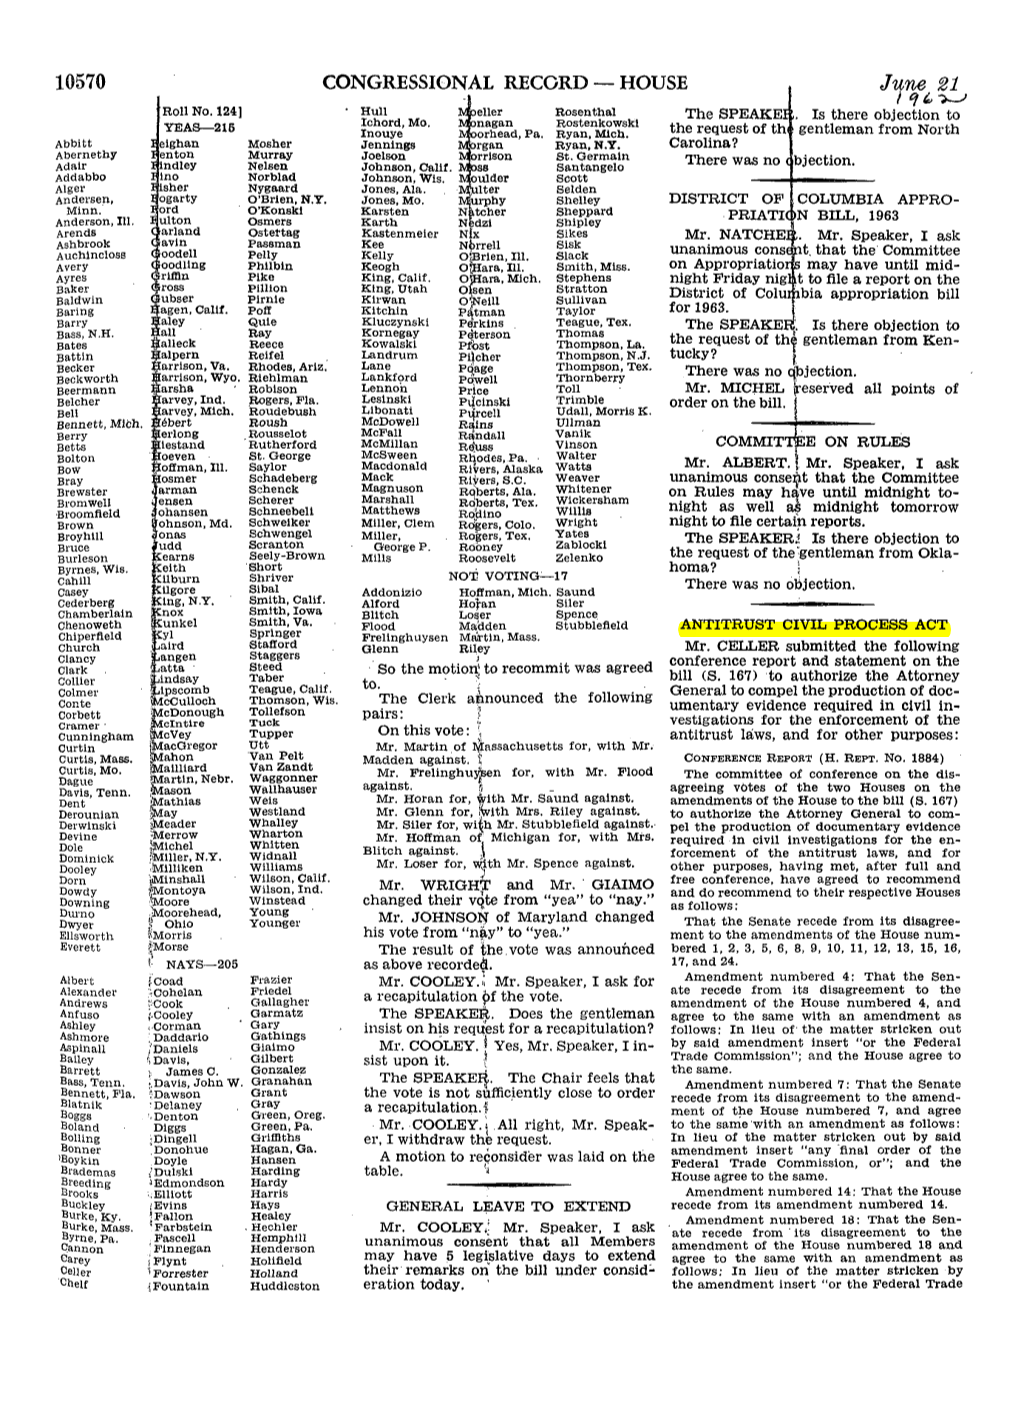 Page 10570 CONGRESSIONAL RECORD — HOUSE June 21 1962 [Roll Number 124] Hull Moeller Rosenthal the SPEAKER